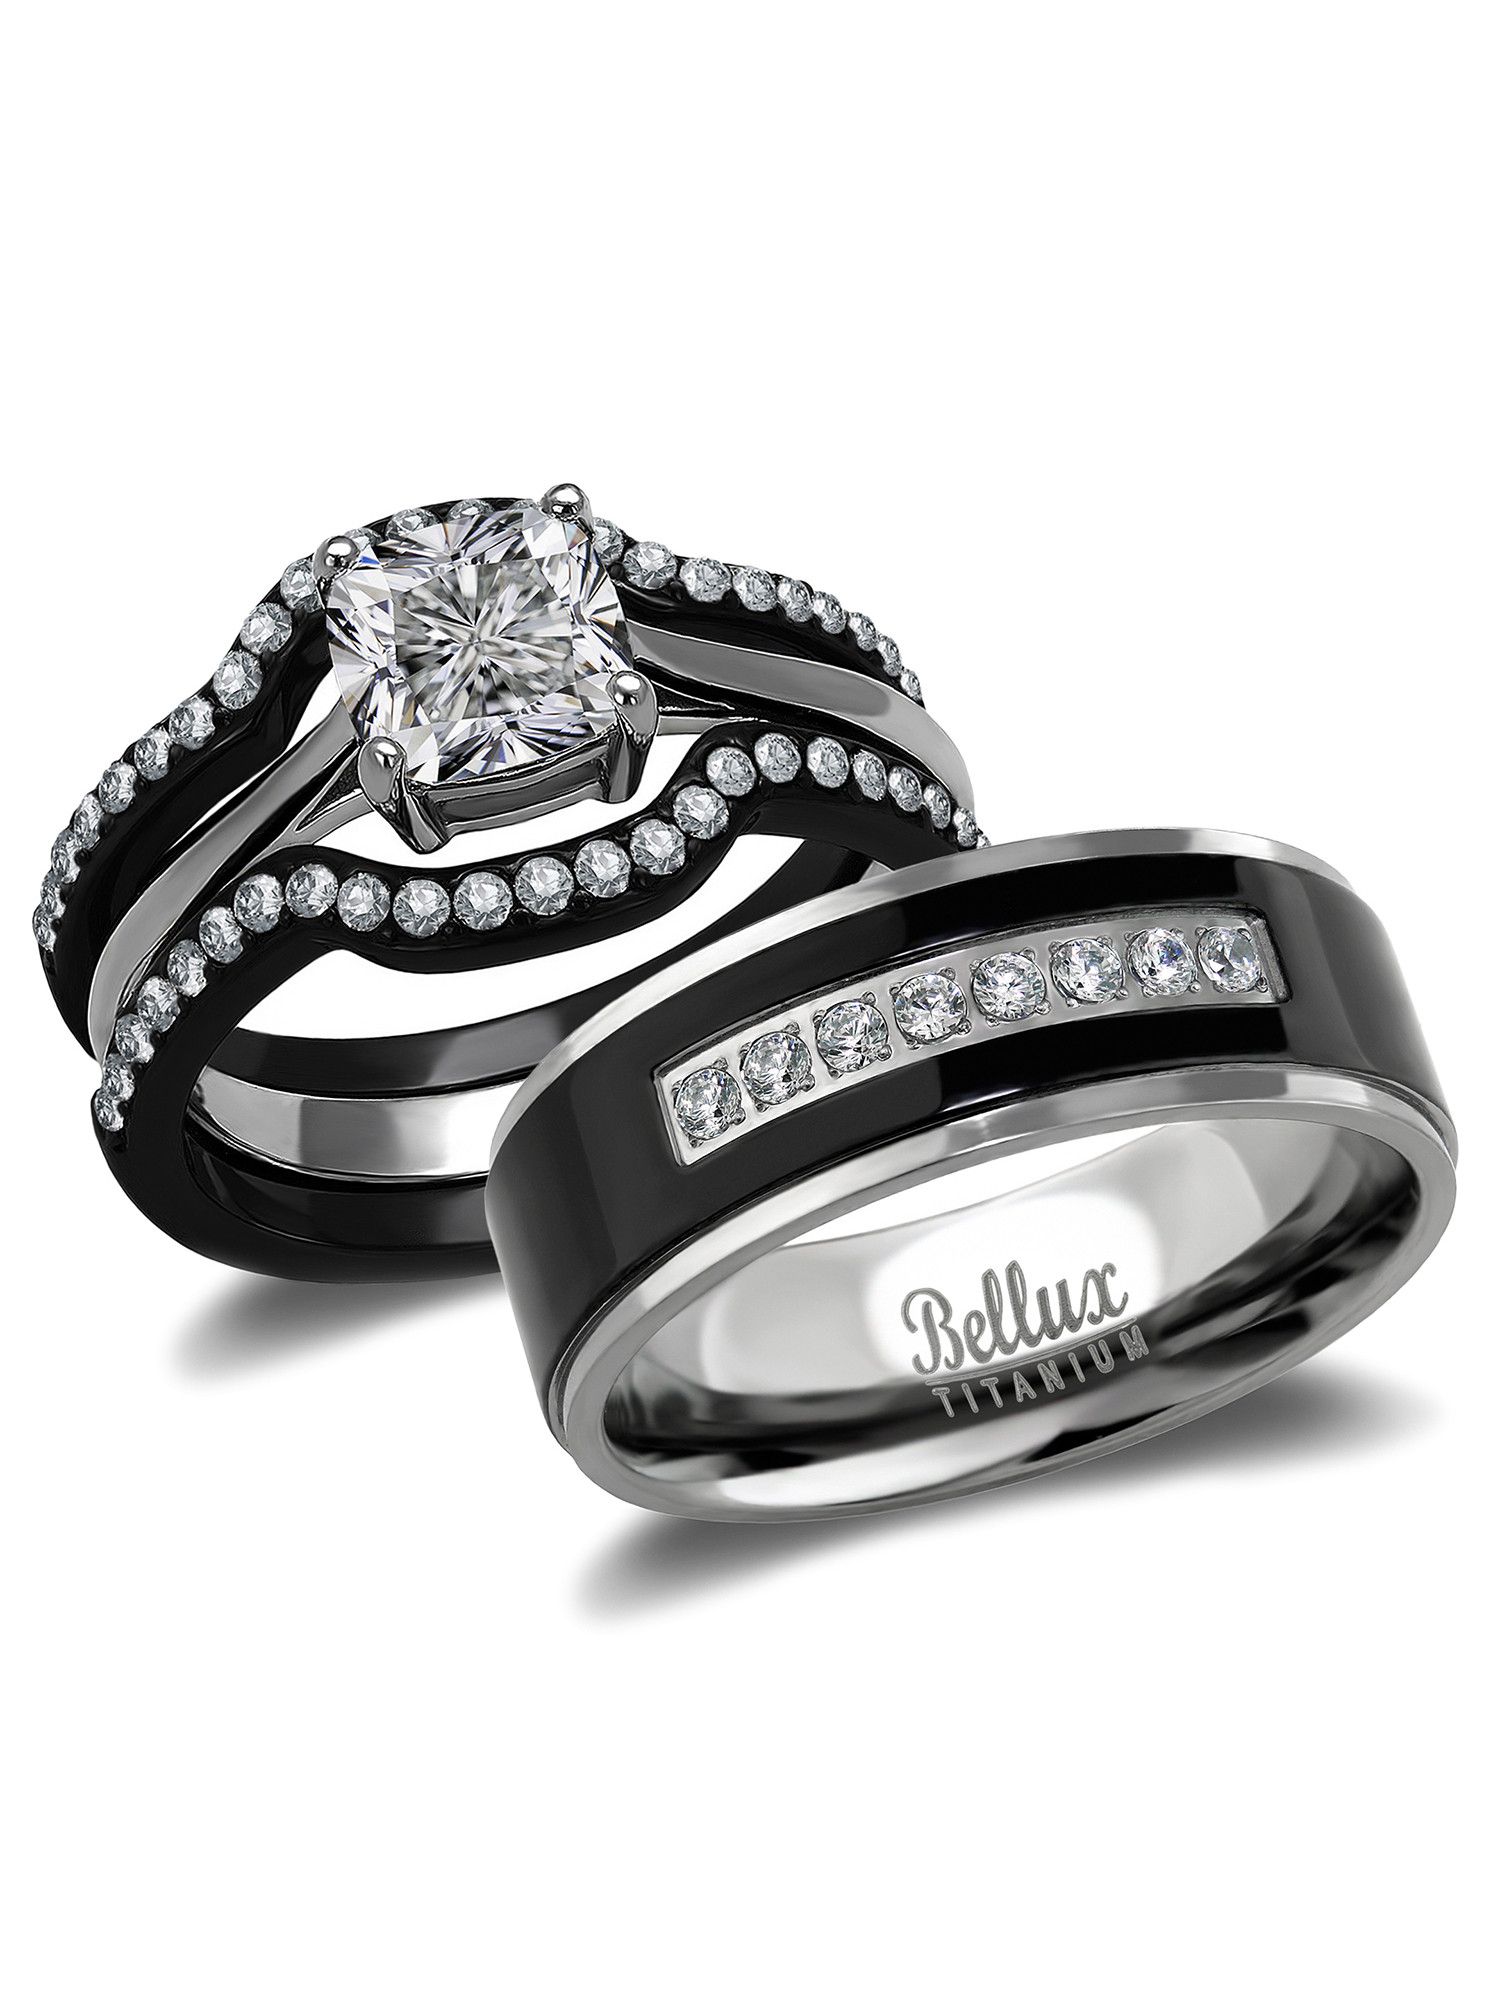 Walmart Wedding Ring Sets
 Bellux Style His and Hers Wedding Ring Sets Black